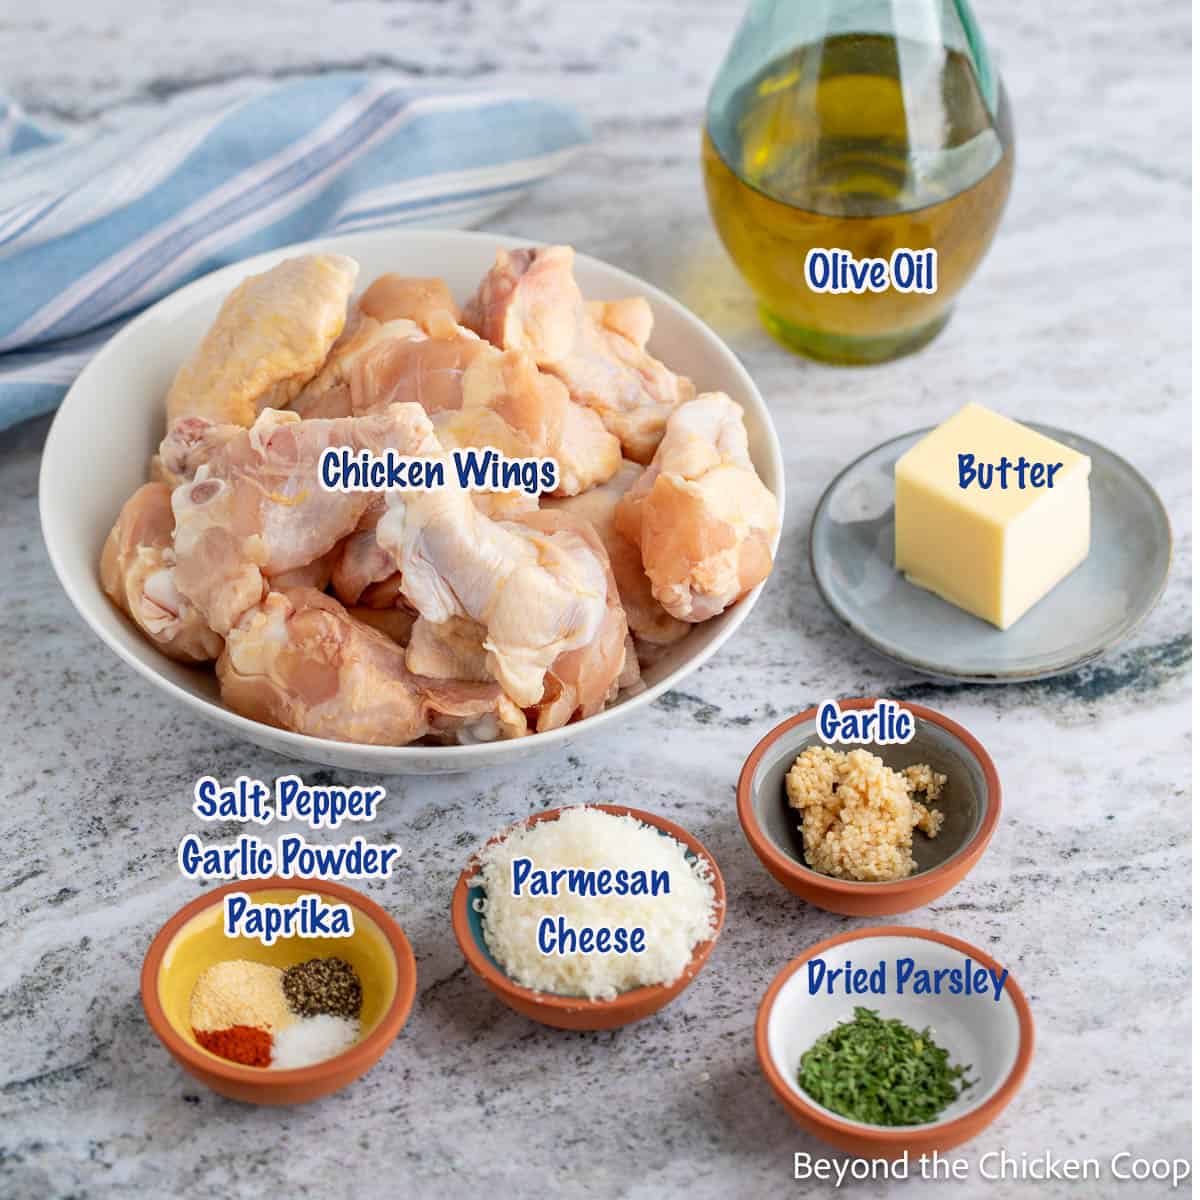 Ingredients for making baked wings with garlic and parmesan.